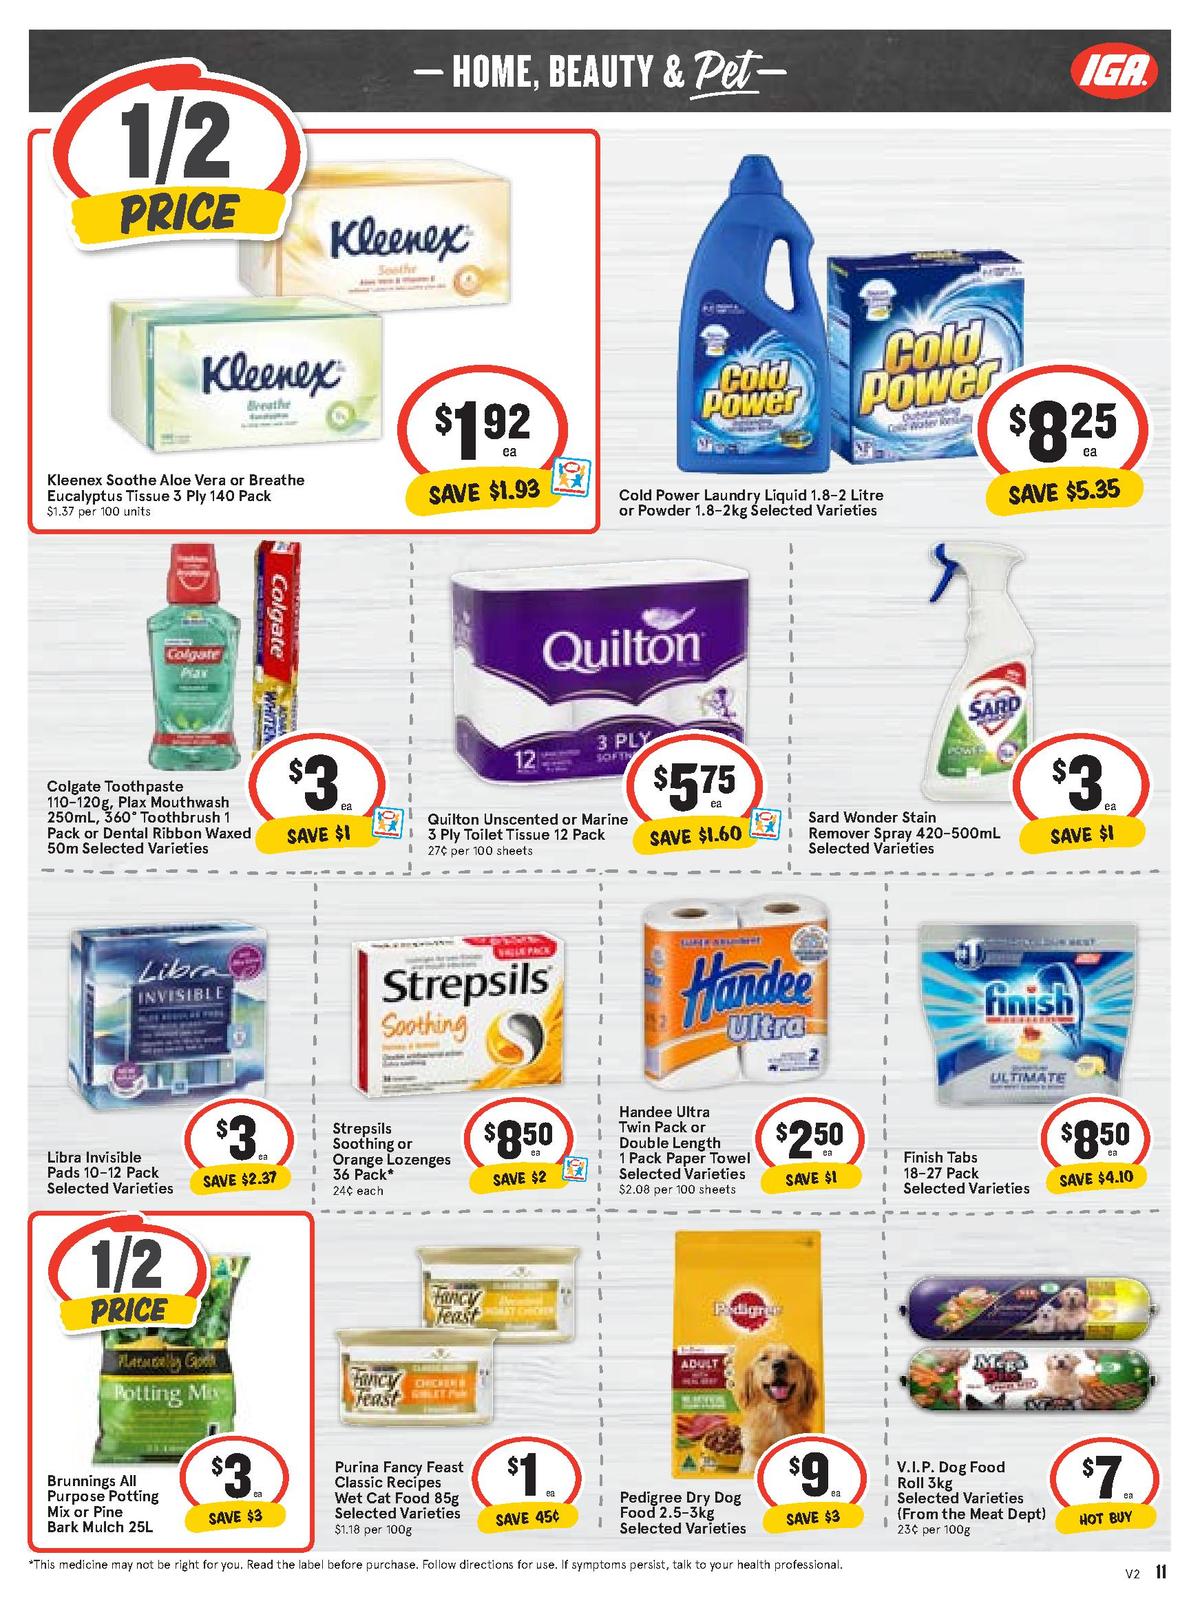 IGA Catalogues from 4 September